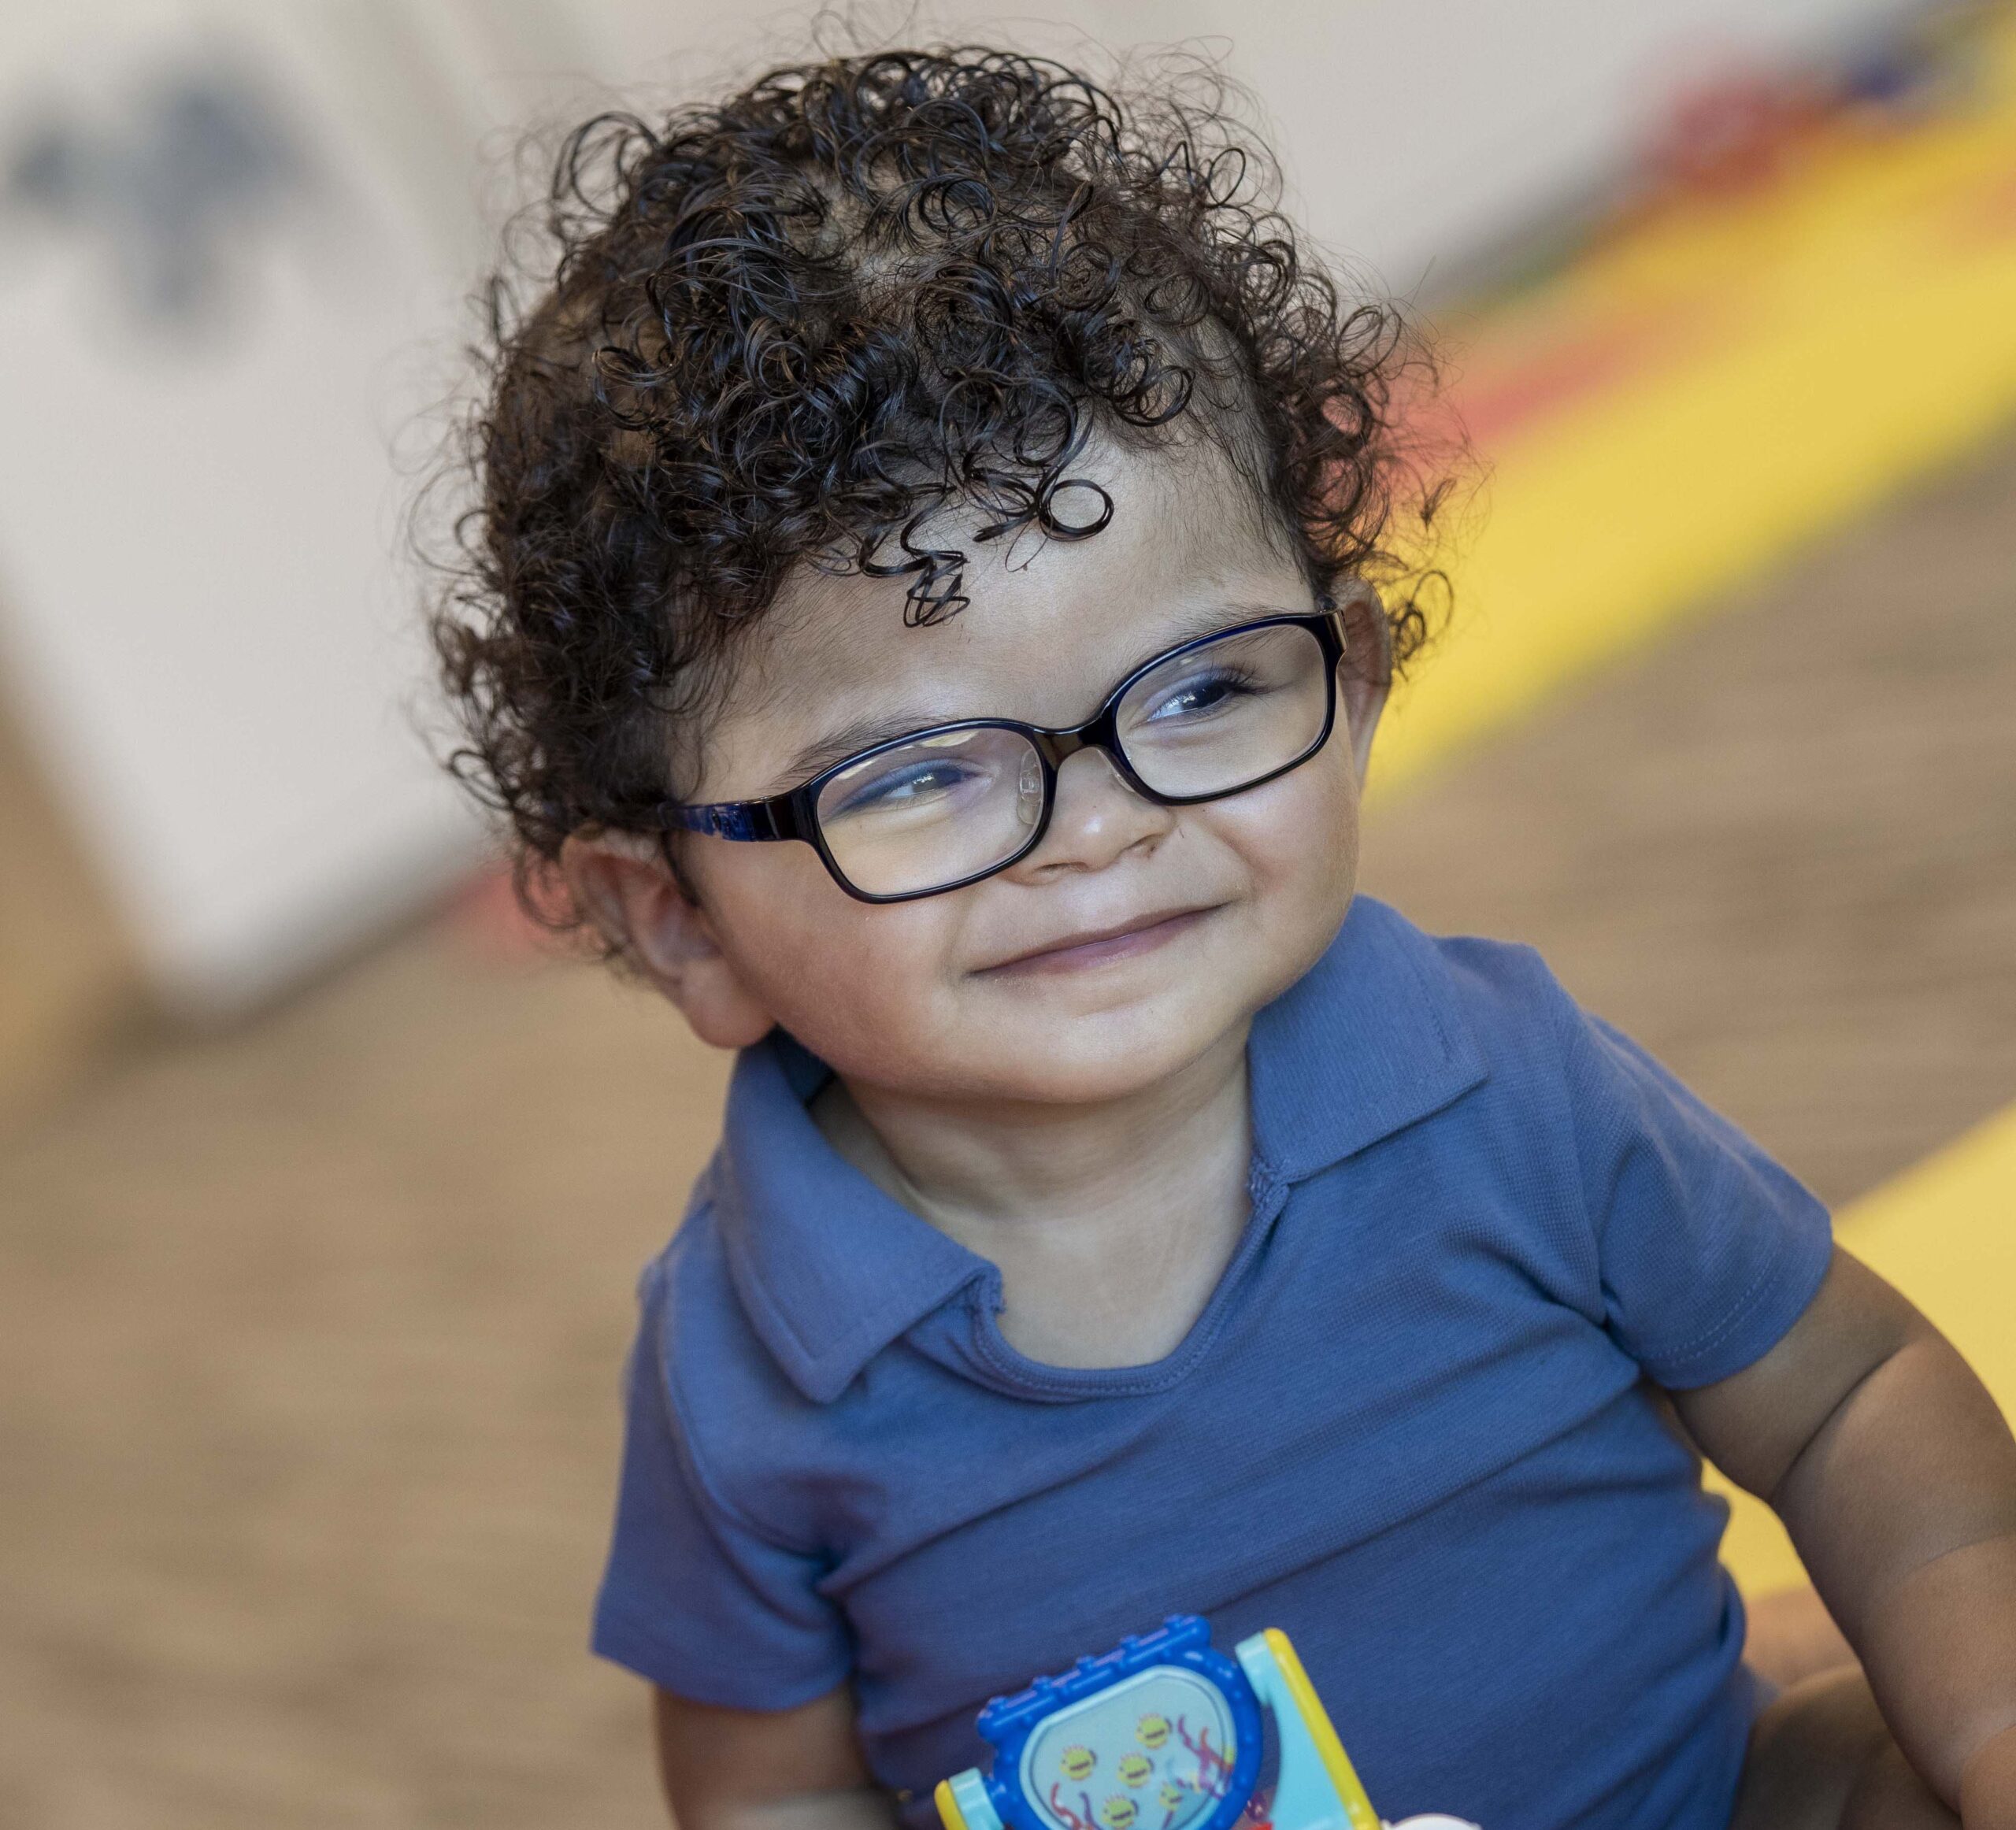 Infant with black curly hair and eyeglasses